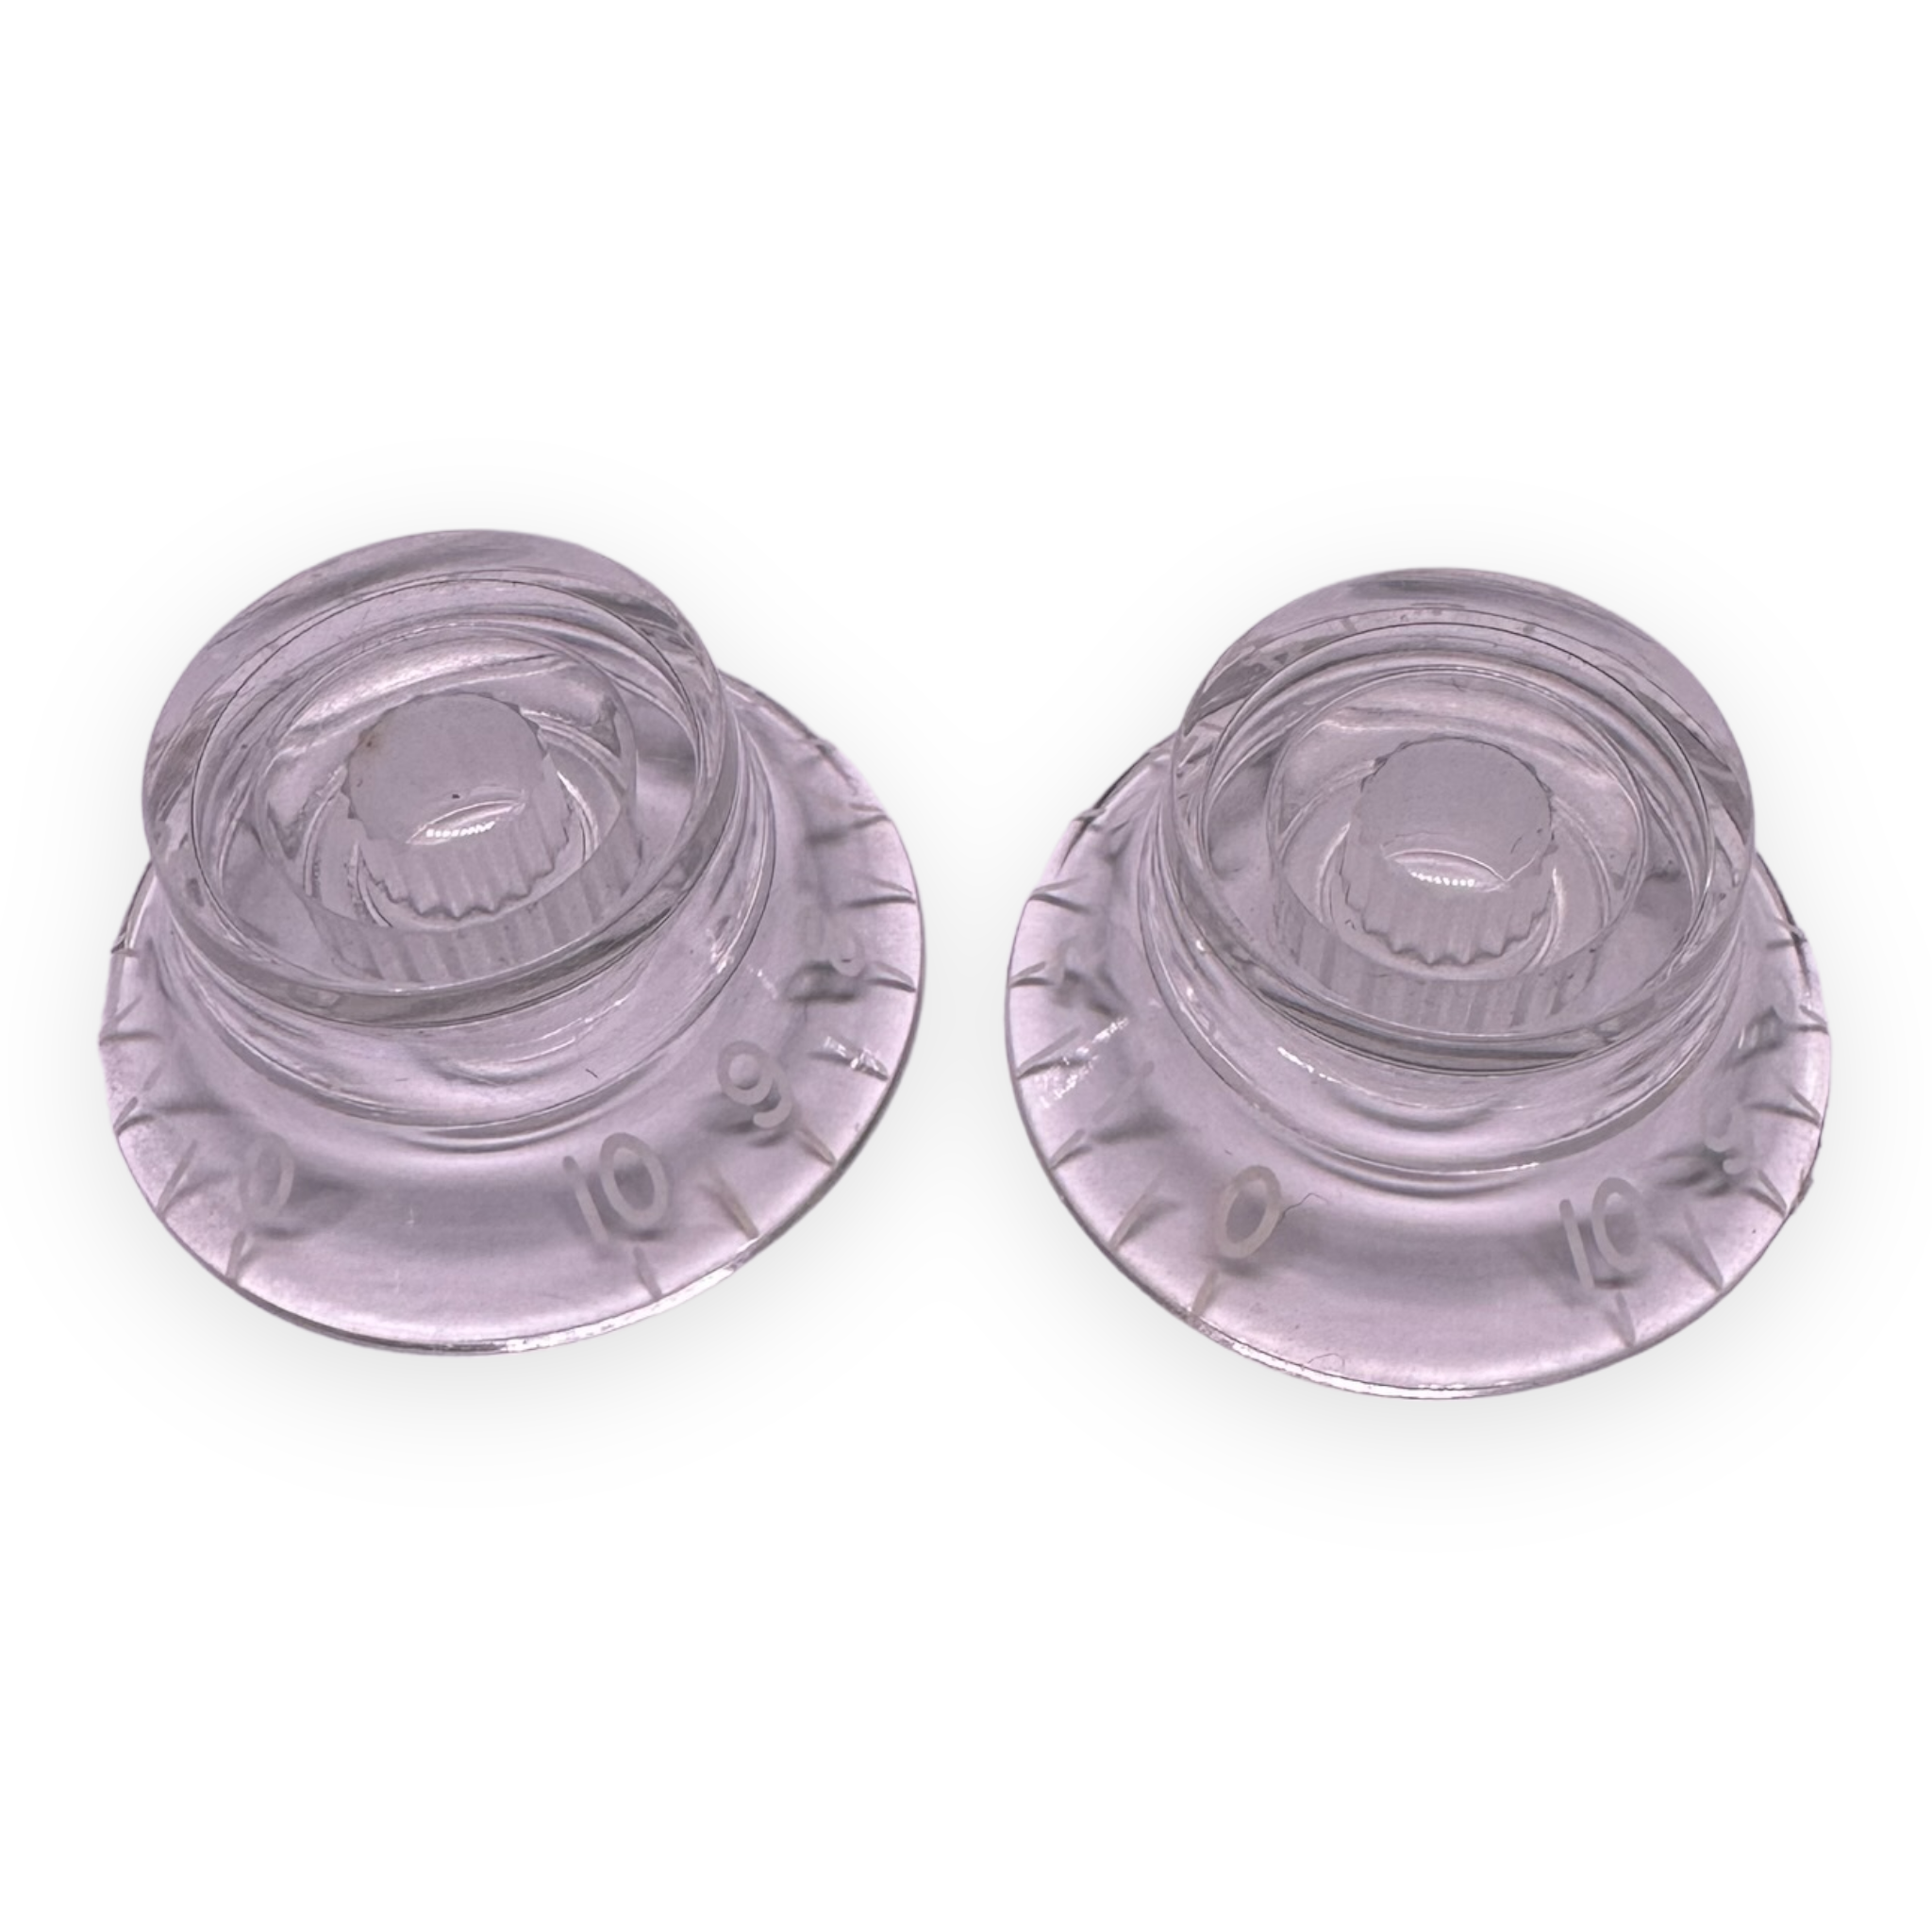 AxLabs Left-Handed Bell Knobs (Set of 2) - AxLabs